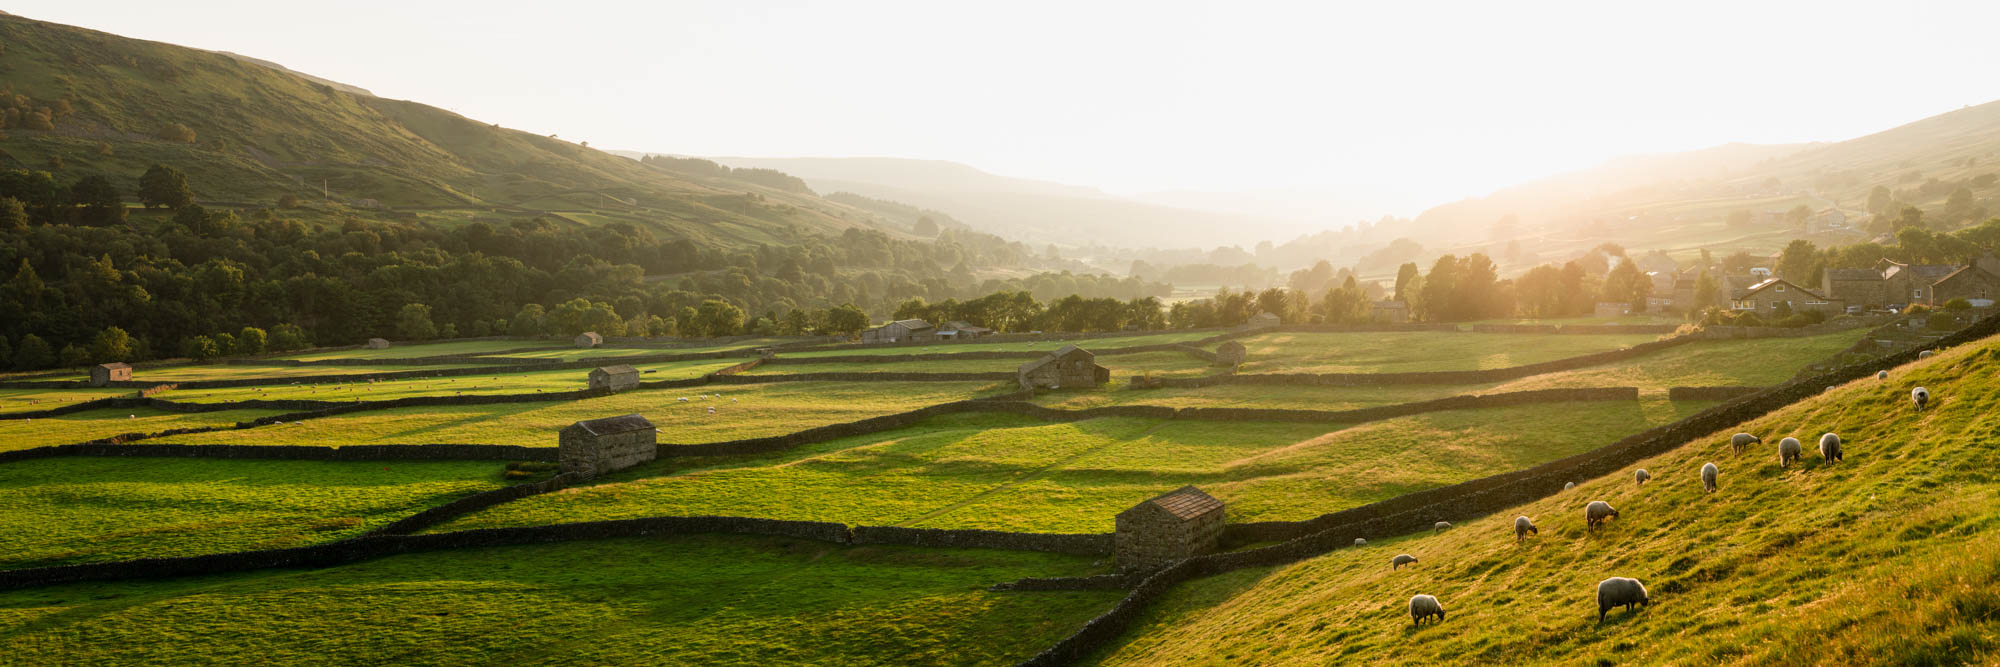 panoramic print of the Yorkshire Dales national park Swaledale